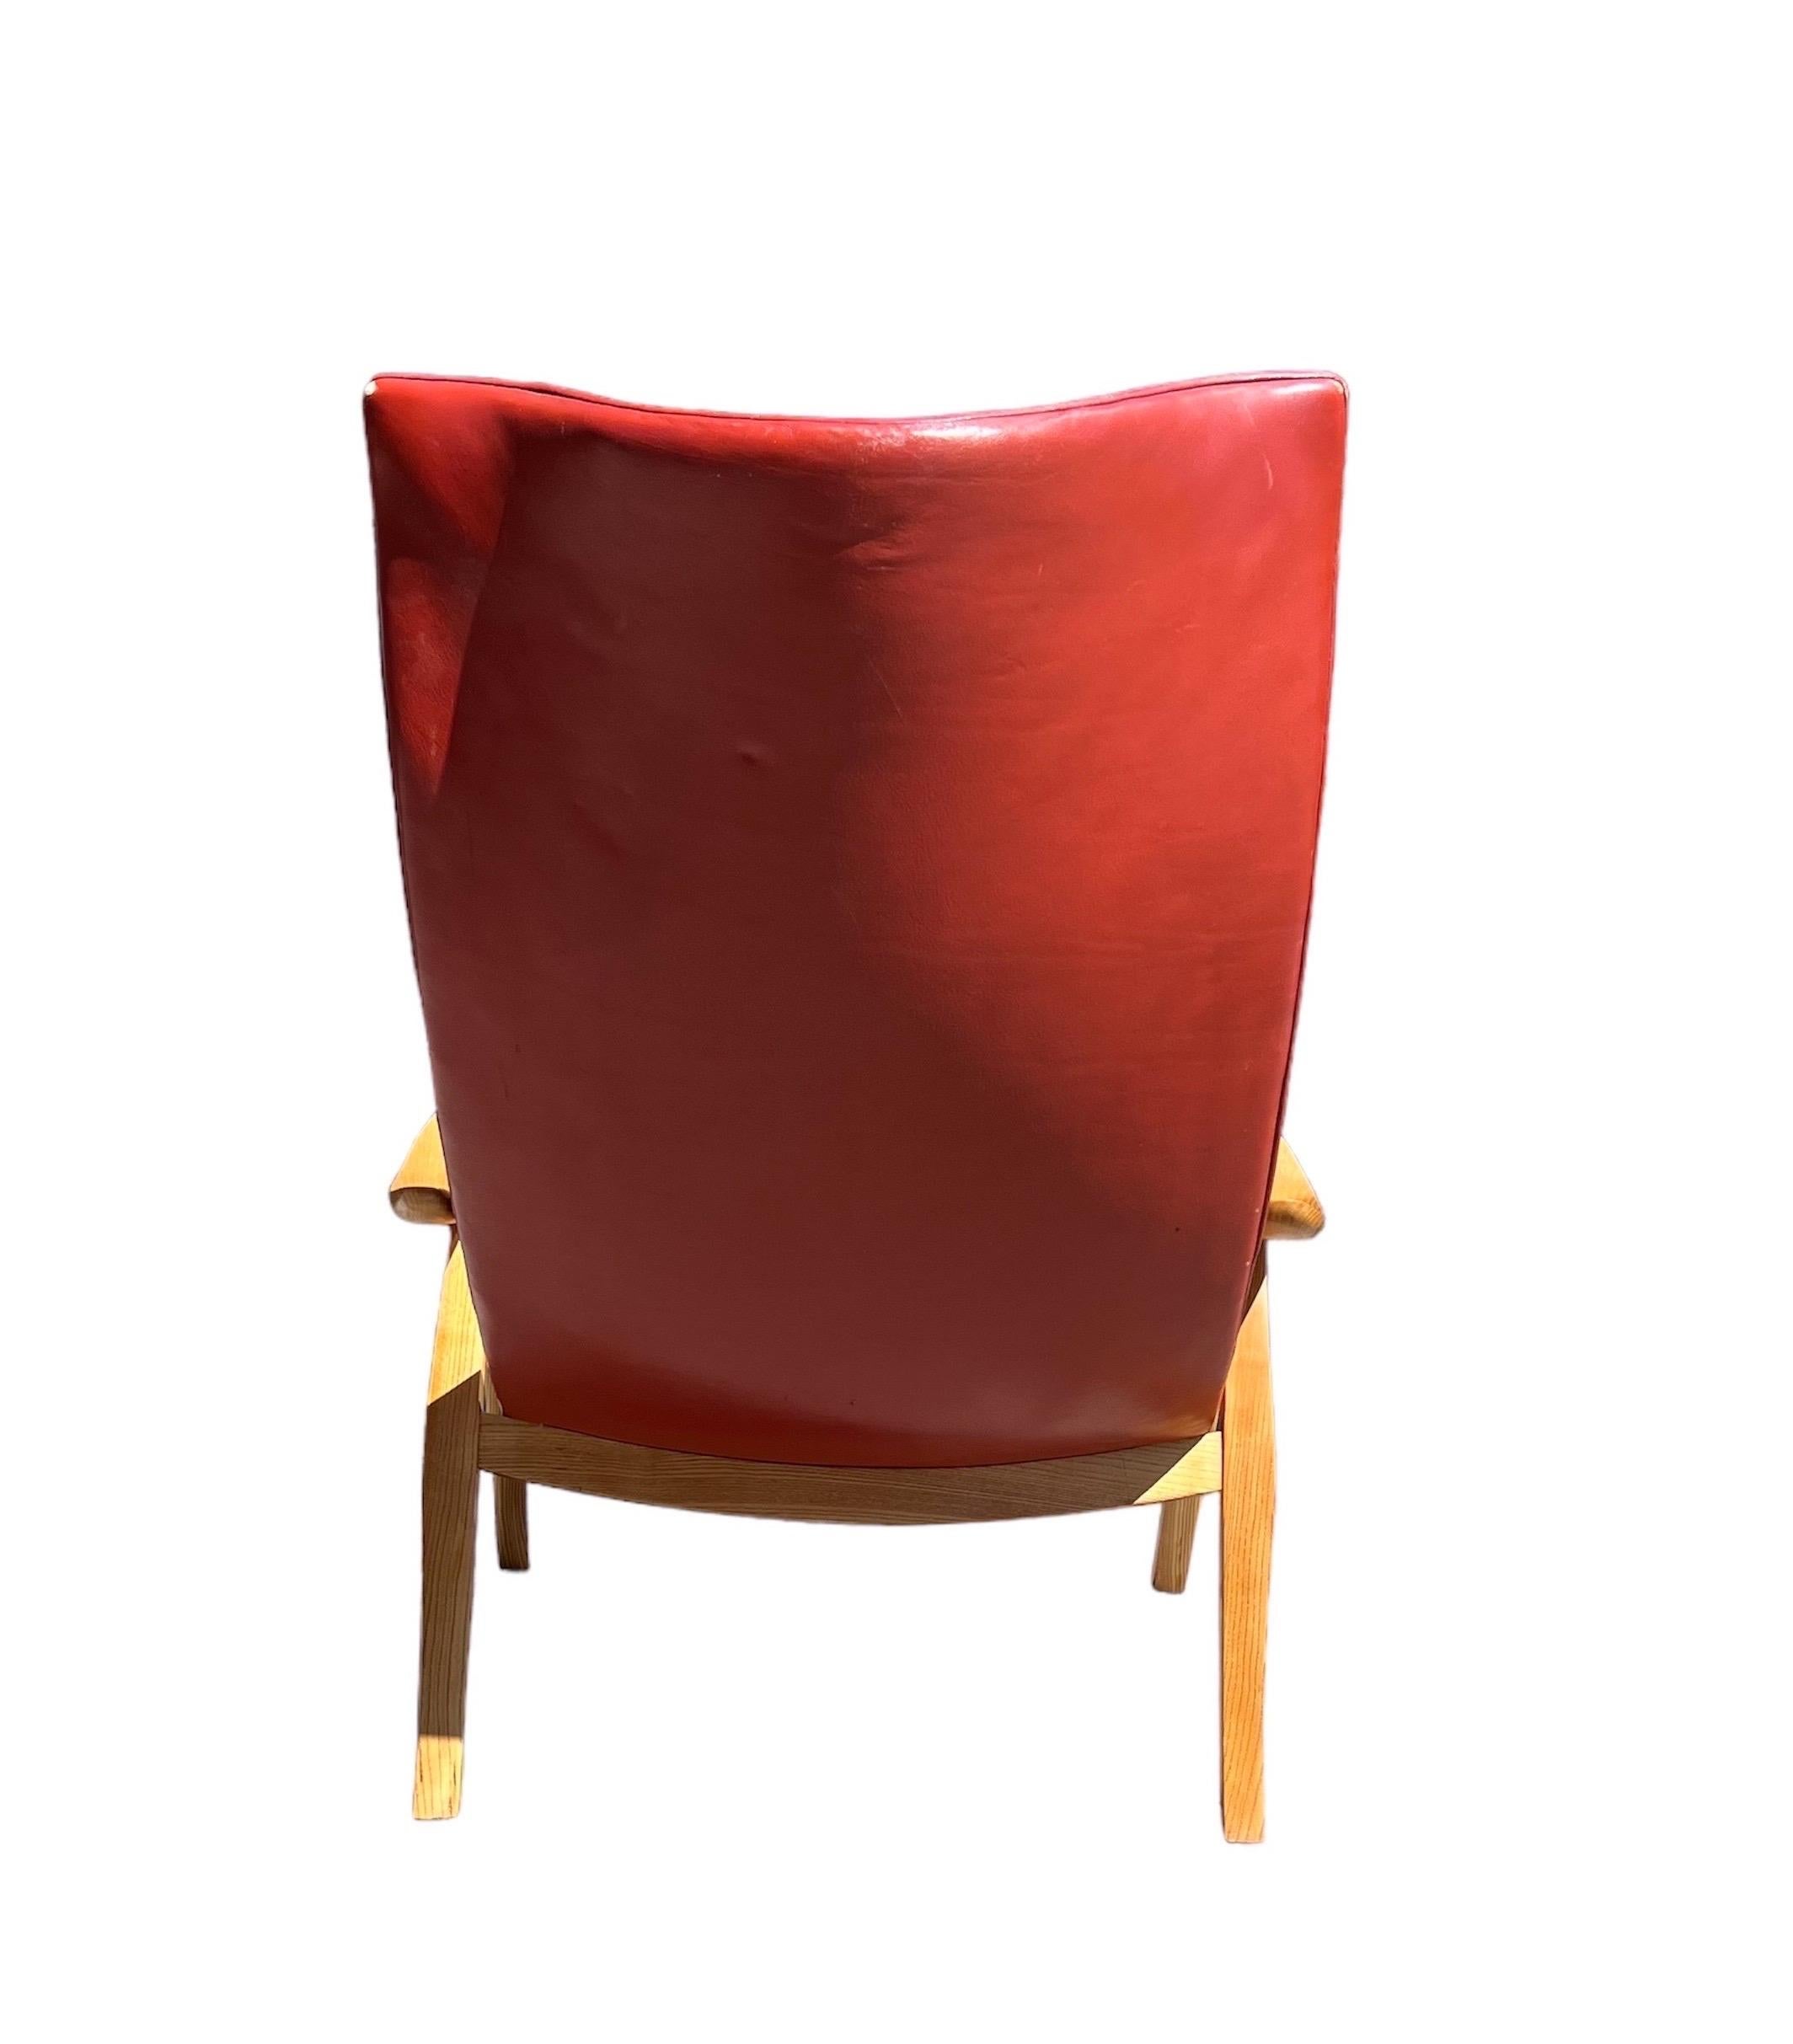 A Frits Henningsen For Carl Hansen Signature Style armchair

Frits Henningsen (1889-1965) was known as an uncompromising designer. He viewed quality craftsmanship as the most important element of his work, making it his focus when developing new